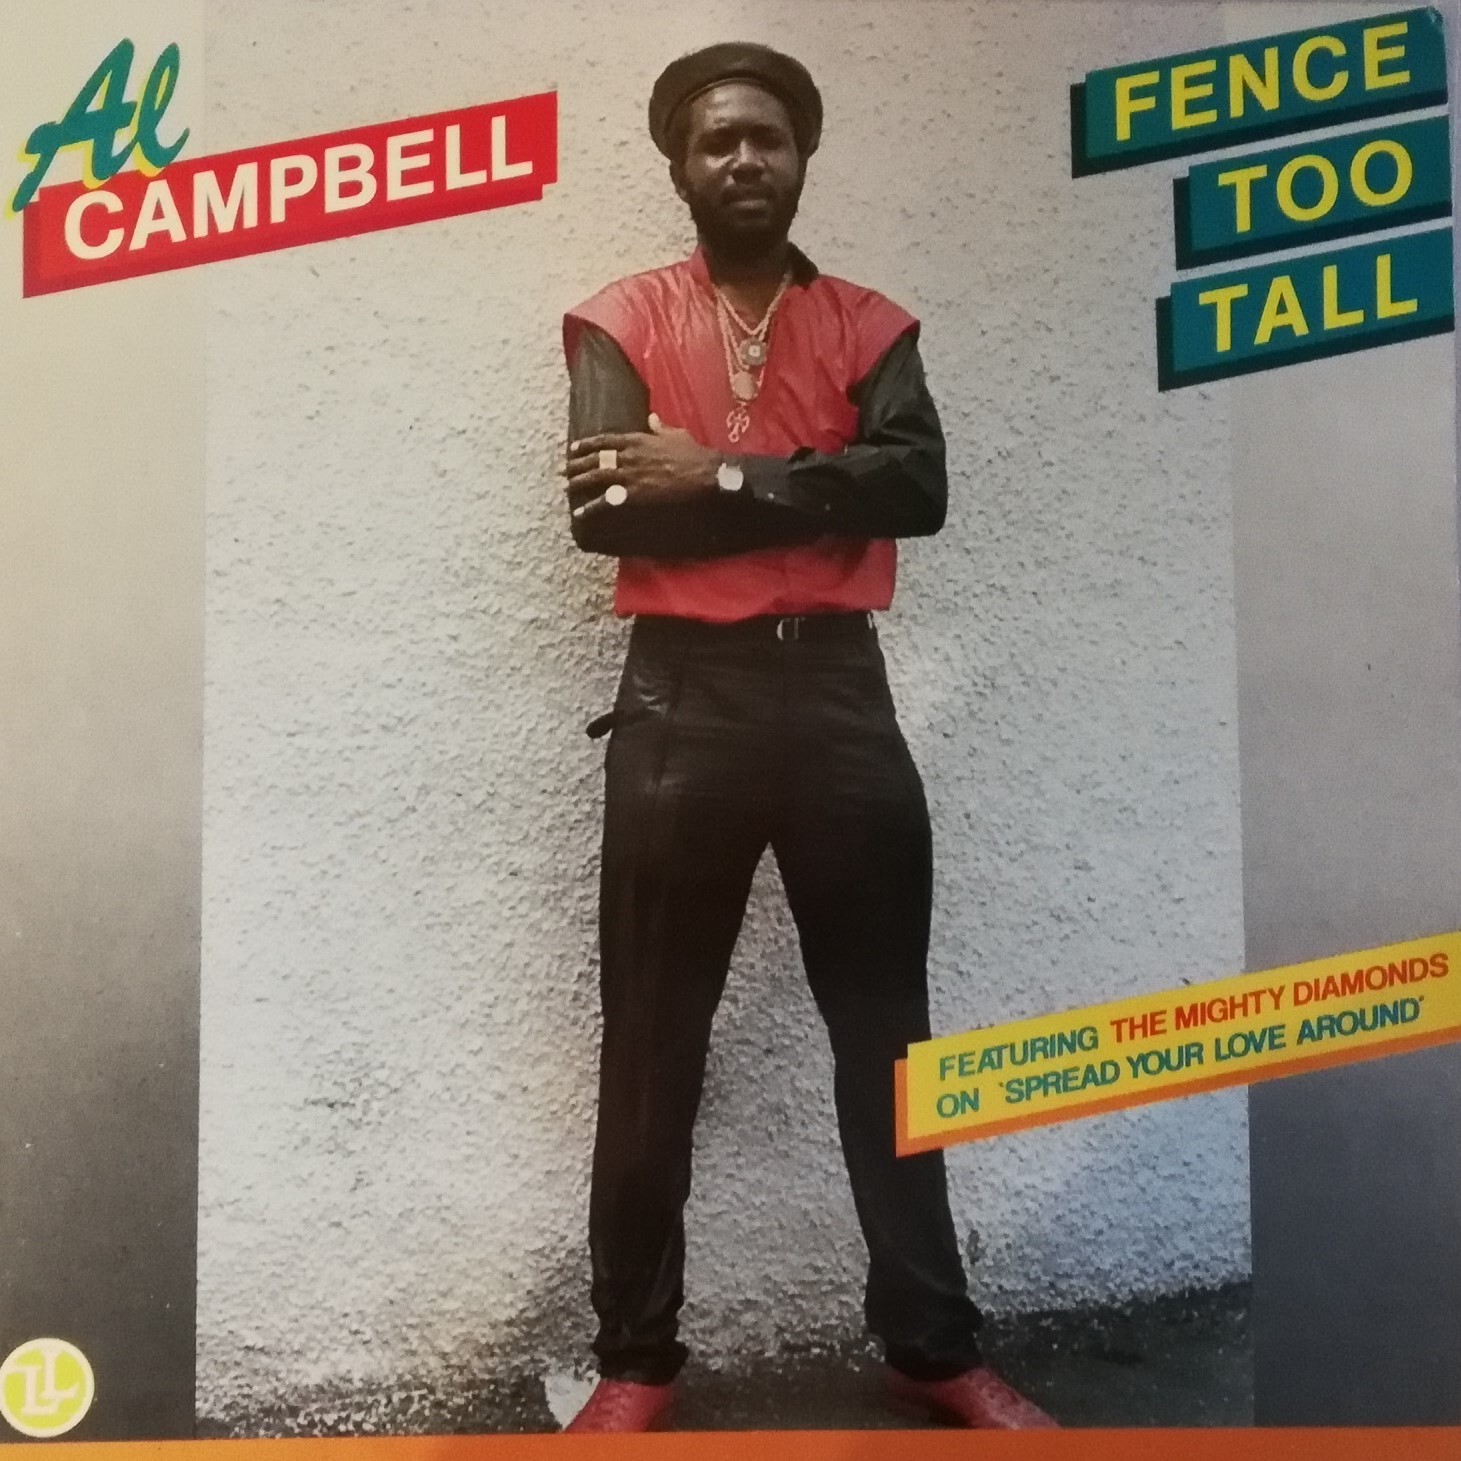 LP AL CAMPBELL - FENCE TOO TALL